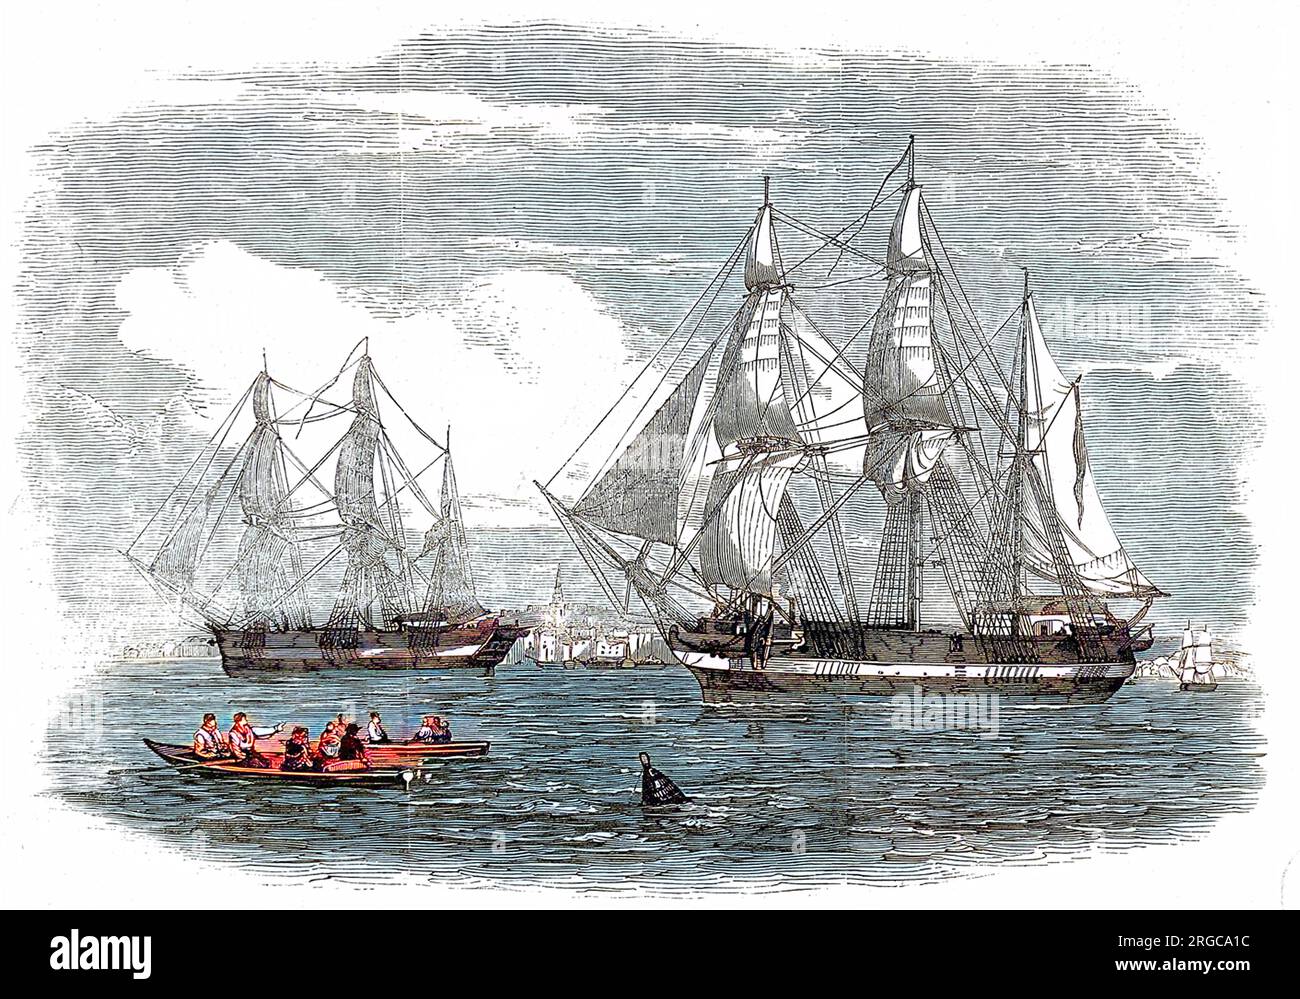 HMS 'Erebus' (left) and HMS 'Terror', pictured on the River Thames, 1845.  In 1845 the British Admiralty sent two polar exploration ships, HMS 'Erebus' and HMS 'Terror', to look for the Northwest passage round the northern coast of Canada. The expedition, commanded by Sir John Franklin, disappeared from view late in 1845 and none of the men were ever seen again.   In fact the ships made it to the King William Island region, then got stuck in the ice. With supplies running out the surviving crew abandoned ship and headed south. However, none made it to safety and it is assumed all died from dis Stock Photo